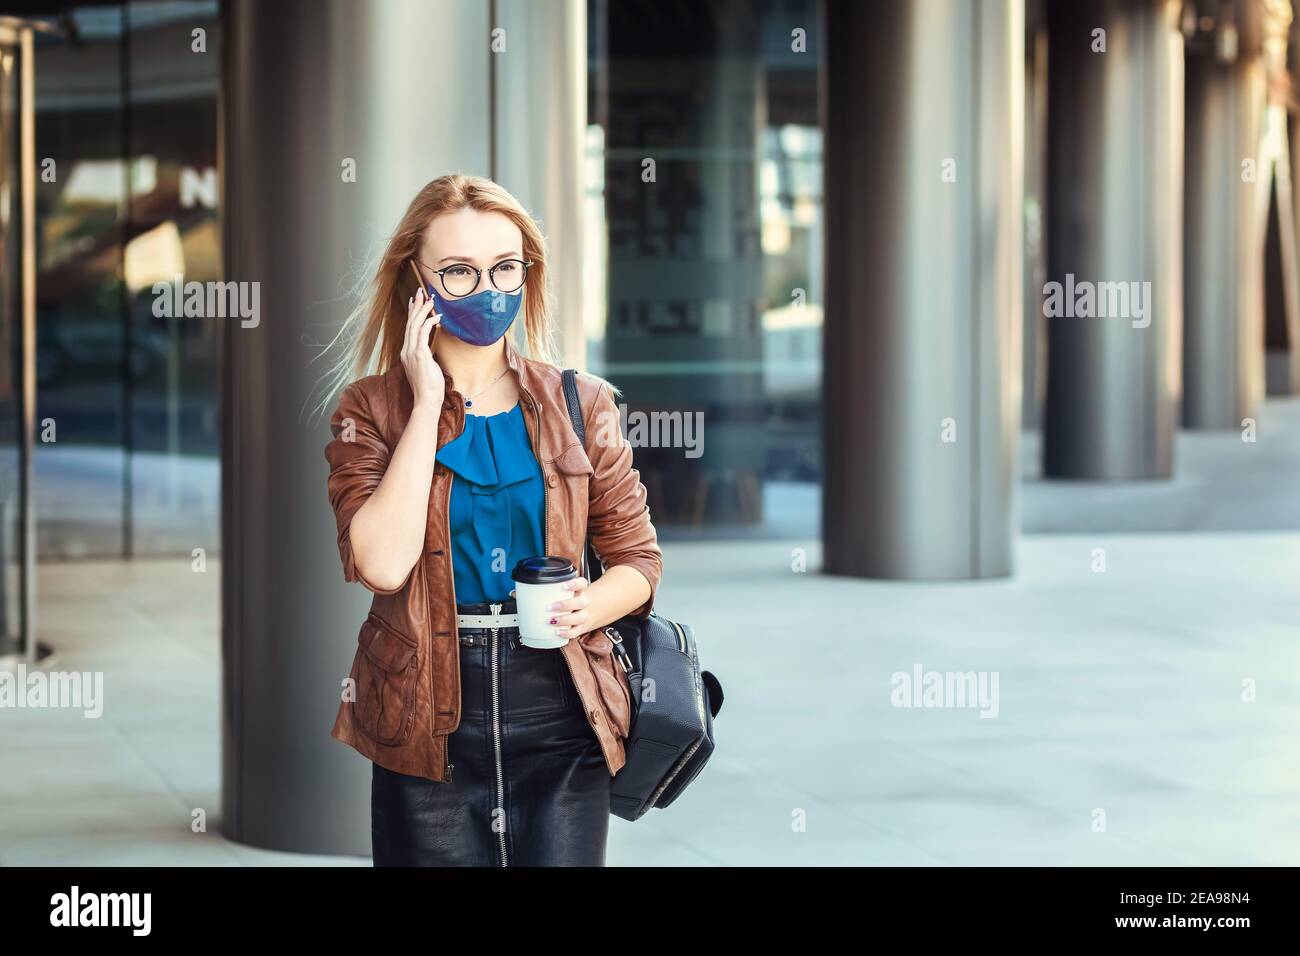 Woman wearing face mask talking on phone outdoor while commuting Stock Photo